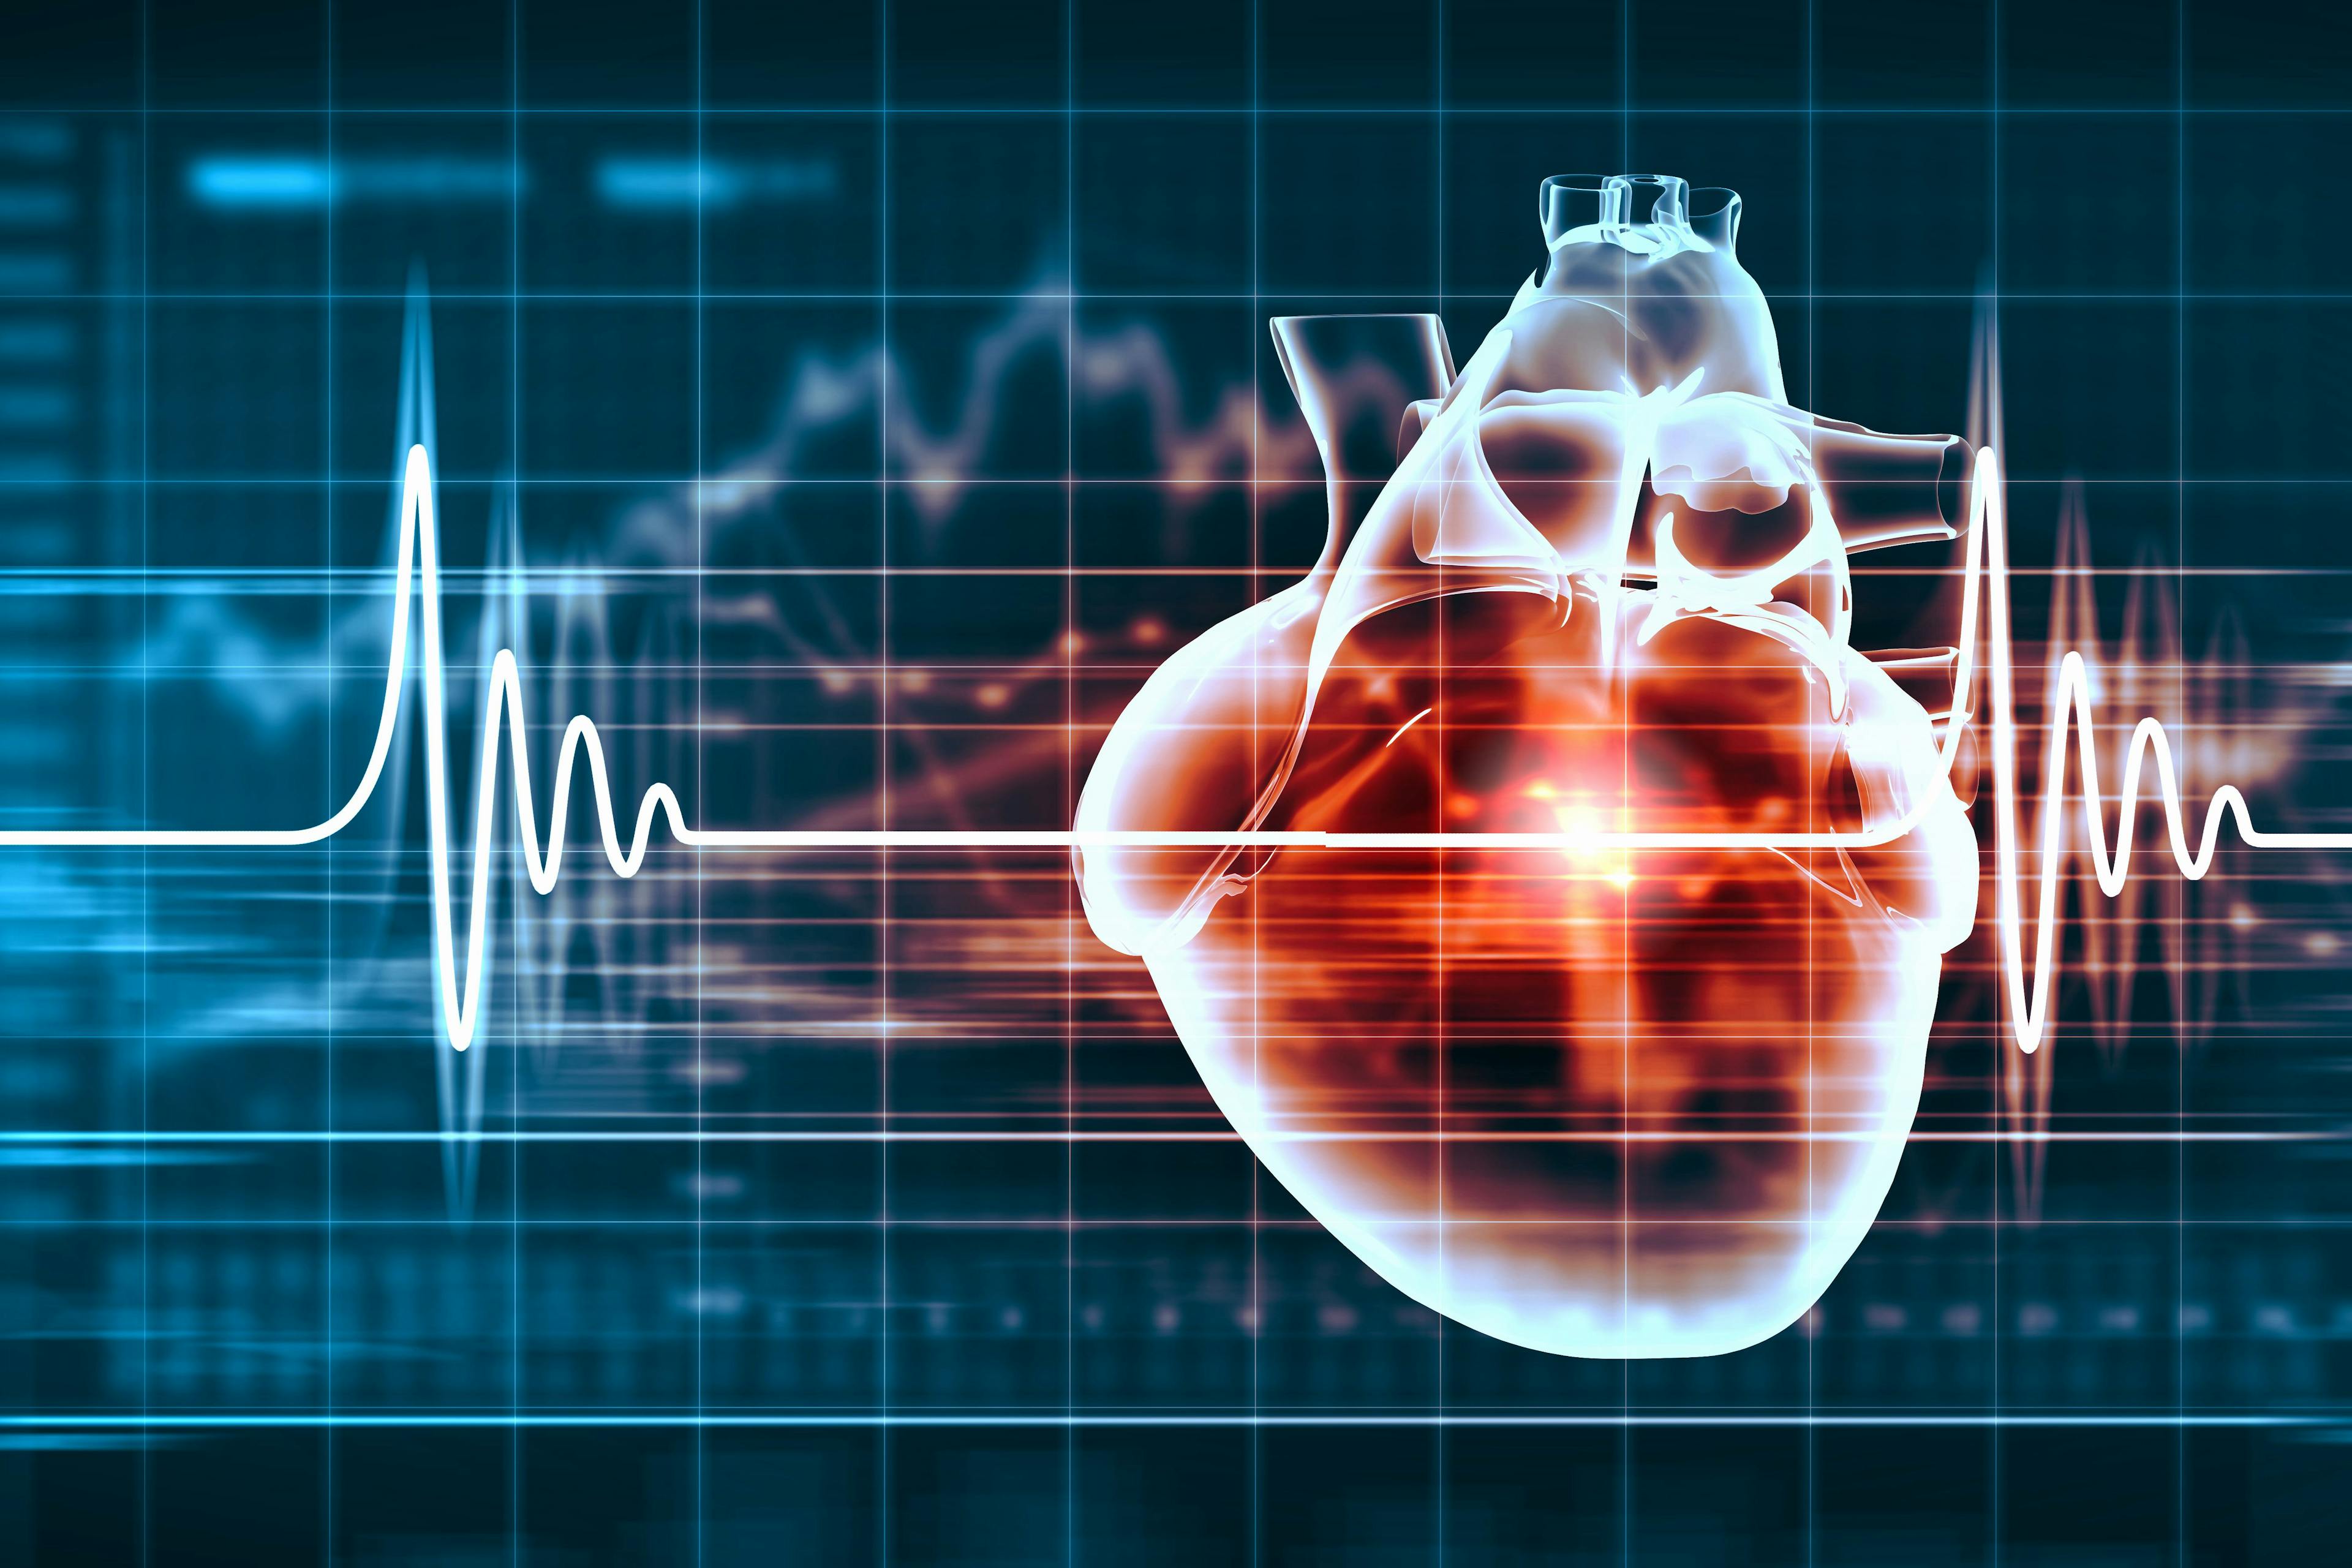 Smartphone-based ECG Screening Detects More Atrial Fibrillation than Usual Care in American Indian Adults